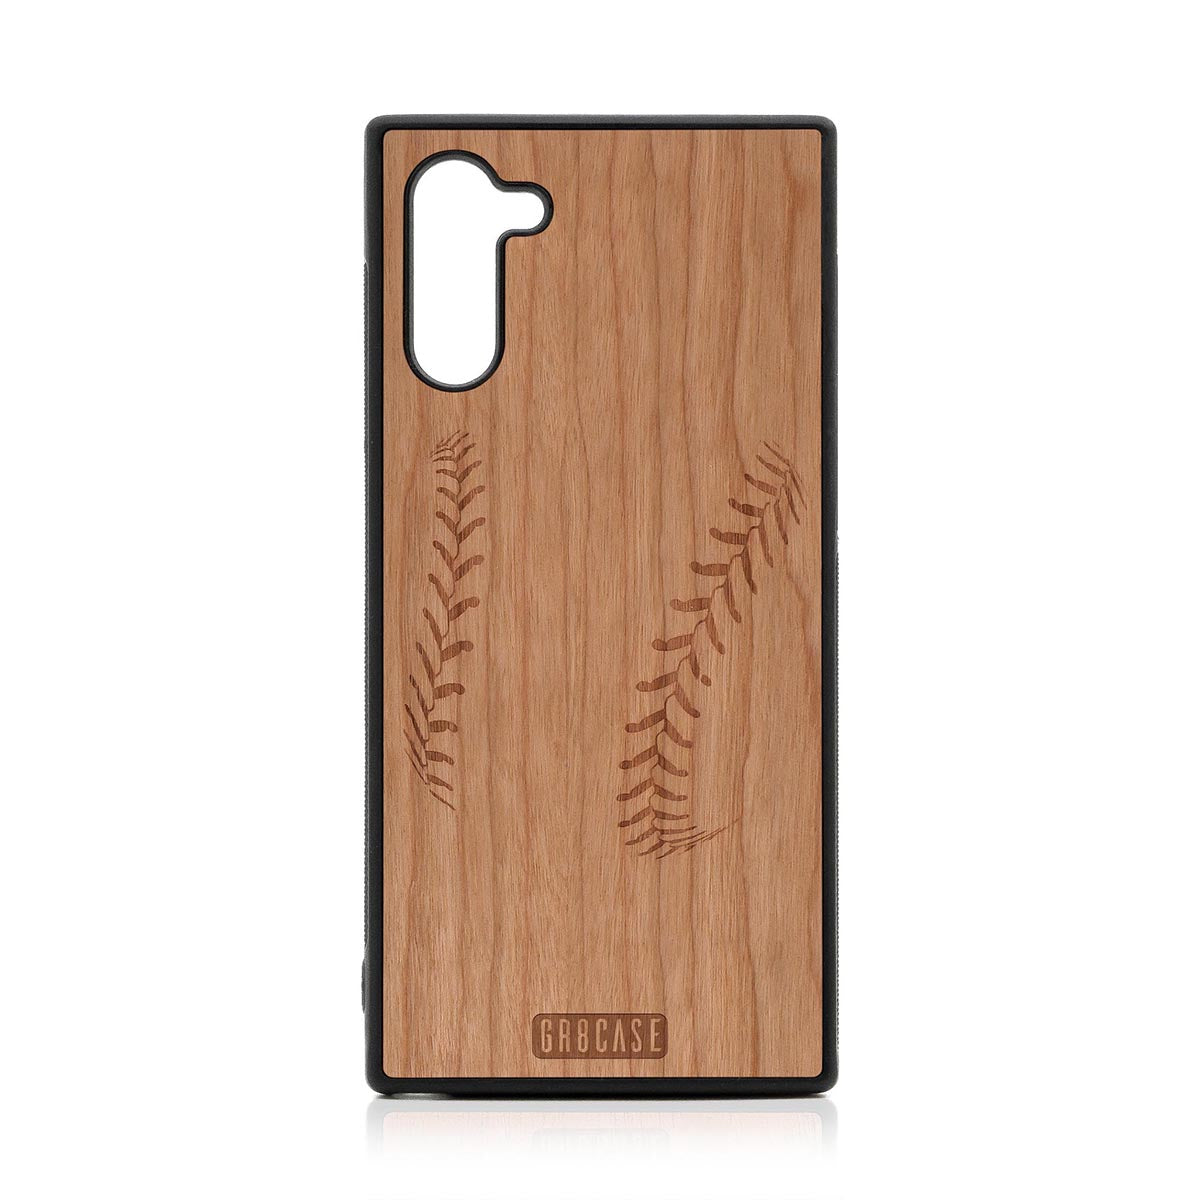 Baseball Stitches Design Wood Case For Samsung Galaxy Note 10 by GR8CASE